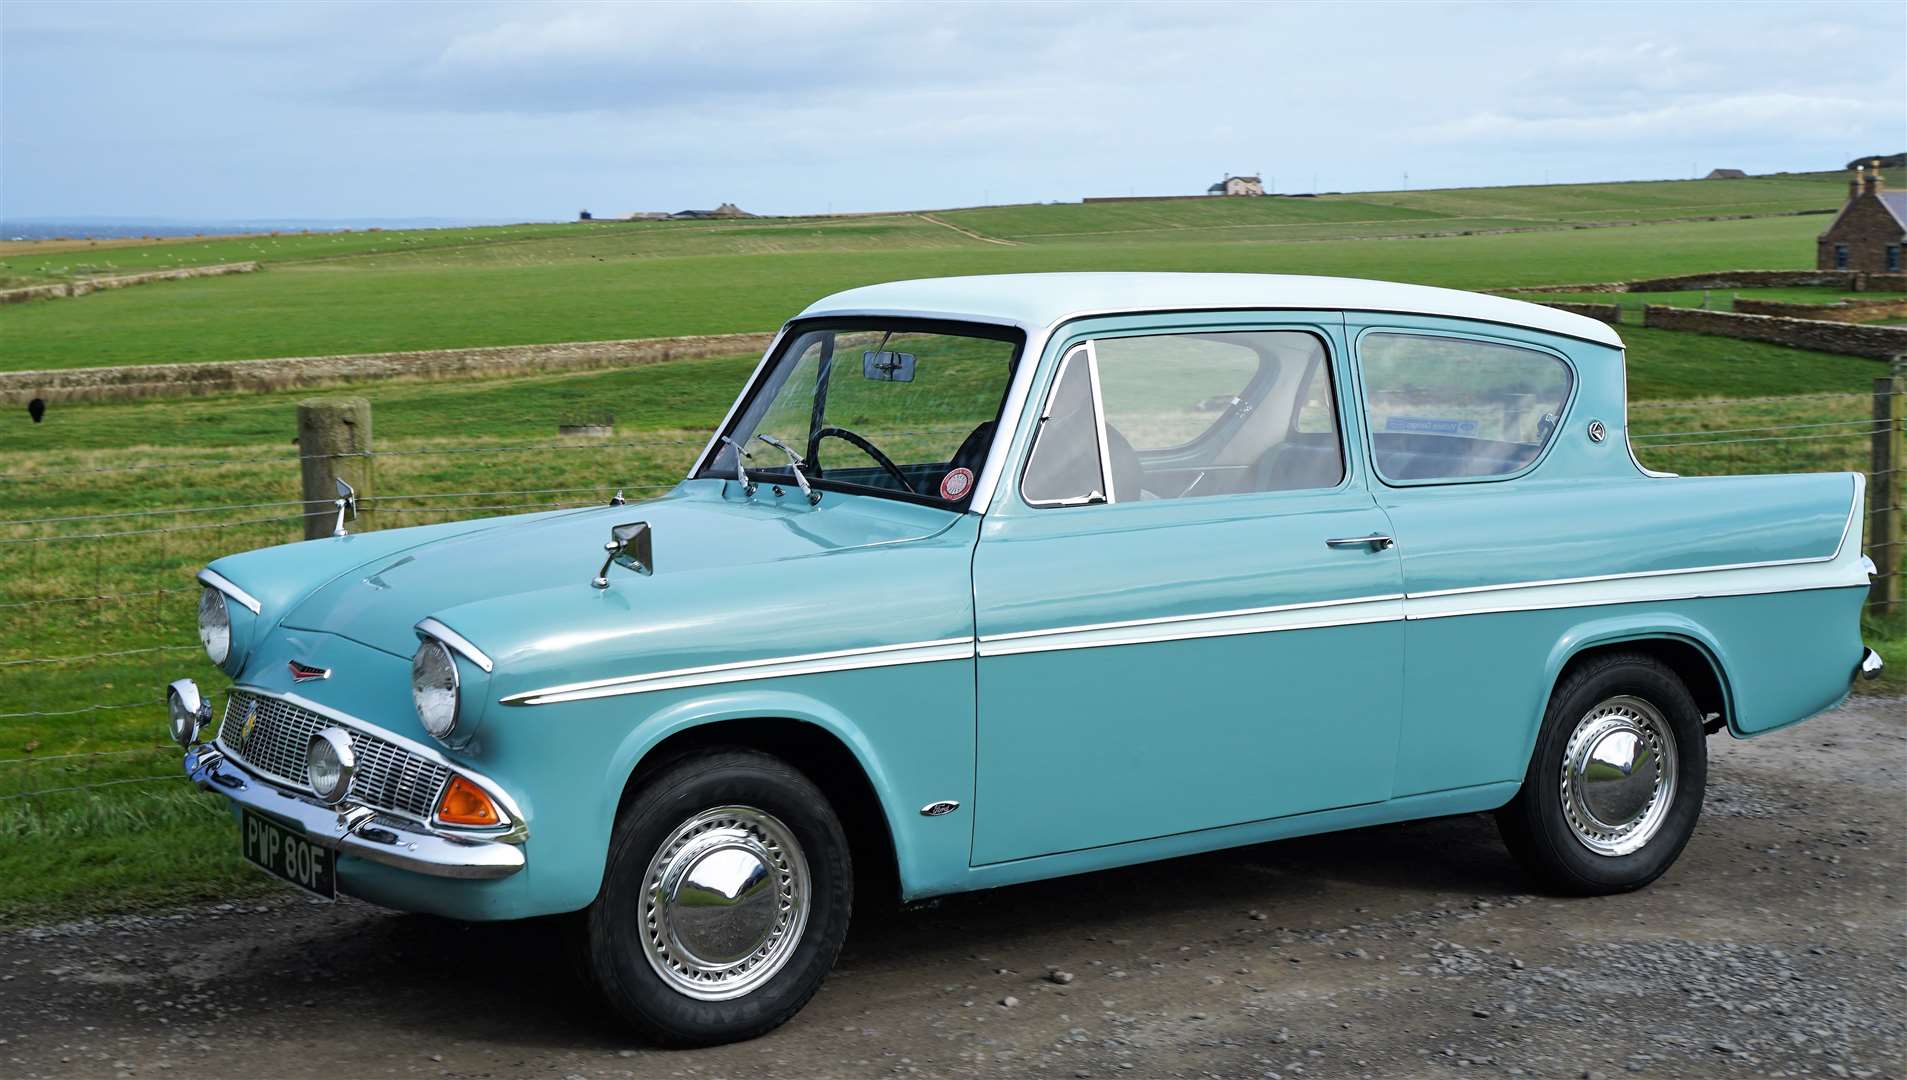 This gleaming Ford Anglia was at Sunday's rally. Picture: DGS